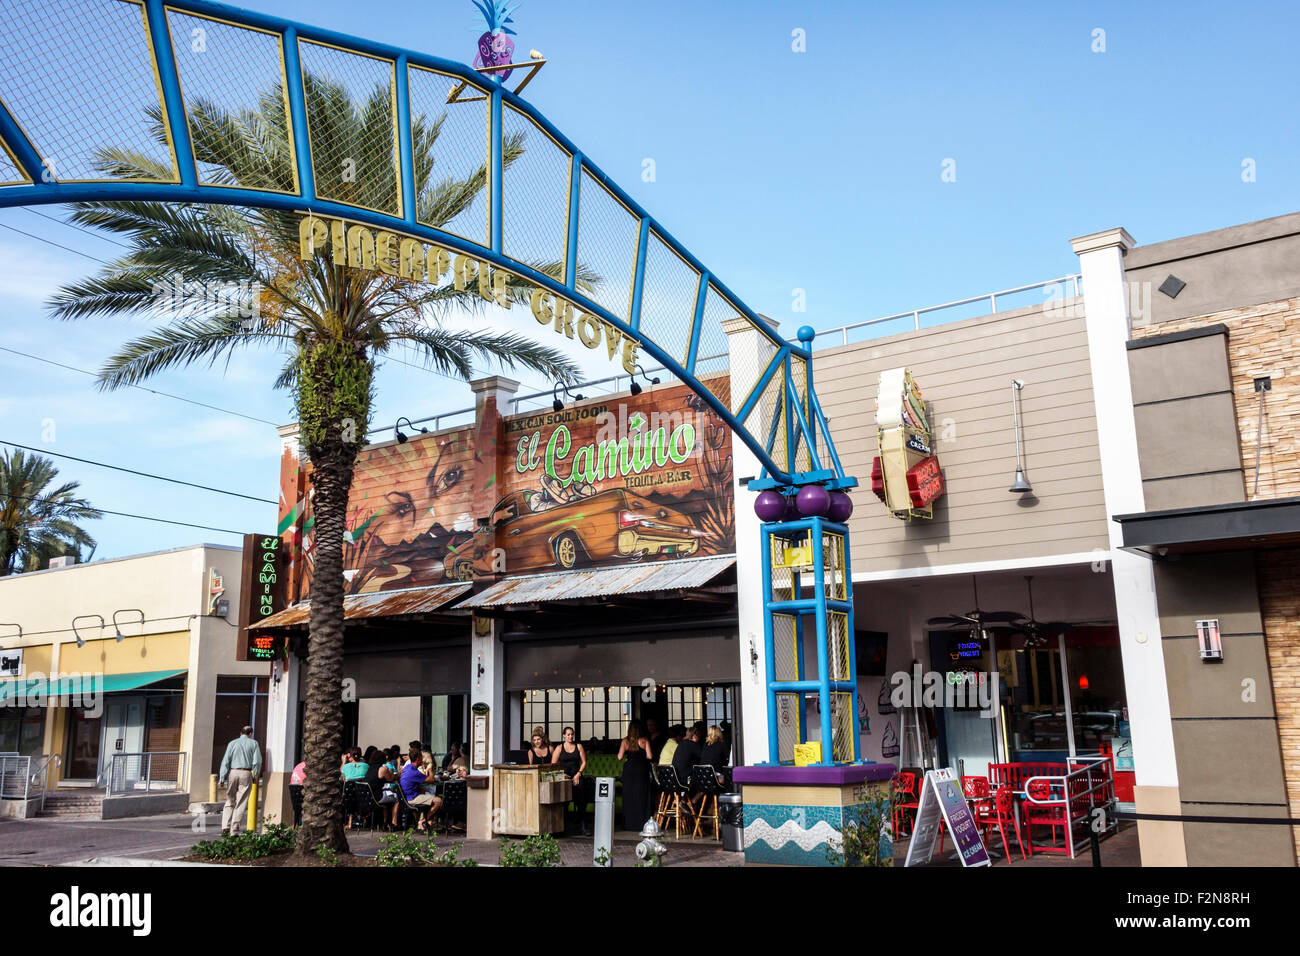 Delray Beach Florida,Pineapple Grove Arts District,2nd Avenue,El Camino,restaurant restaurants food dining cafe cafes,bar lounge pub,front,entrance,FL Stock Photo